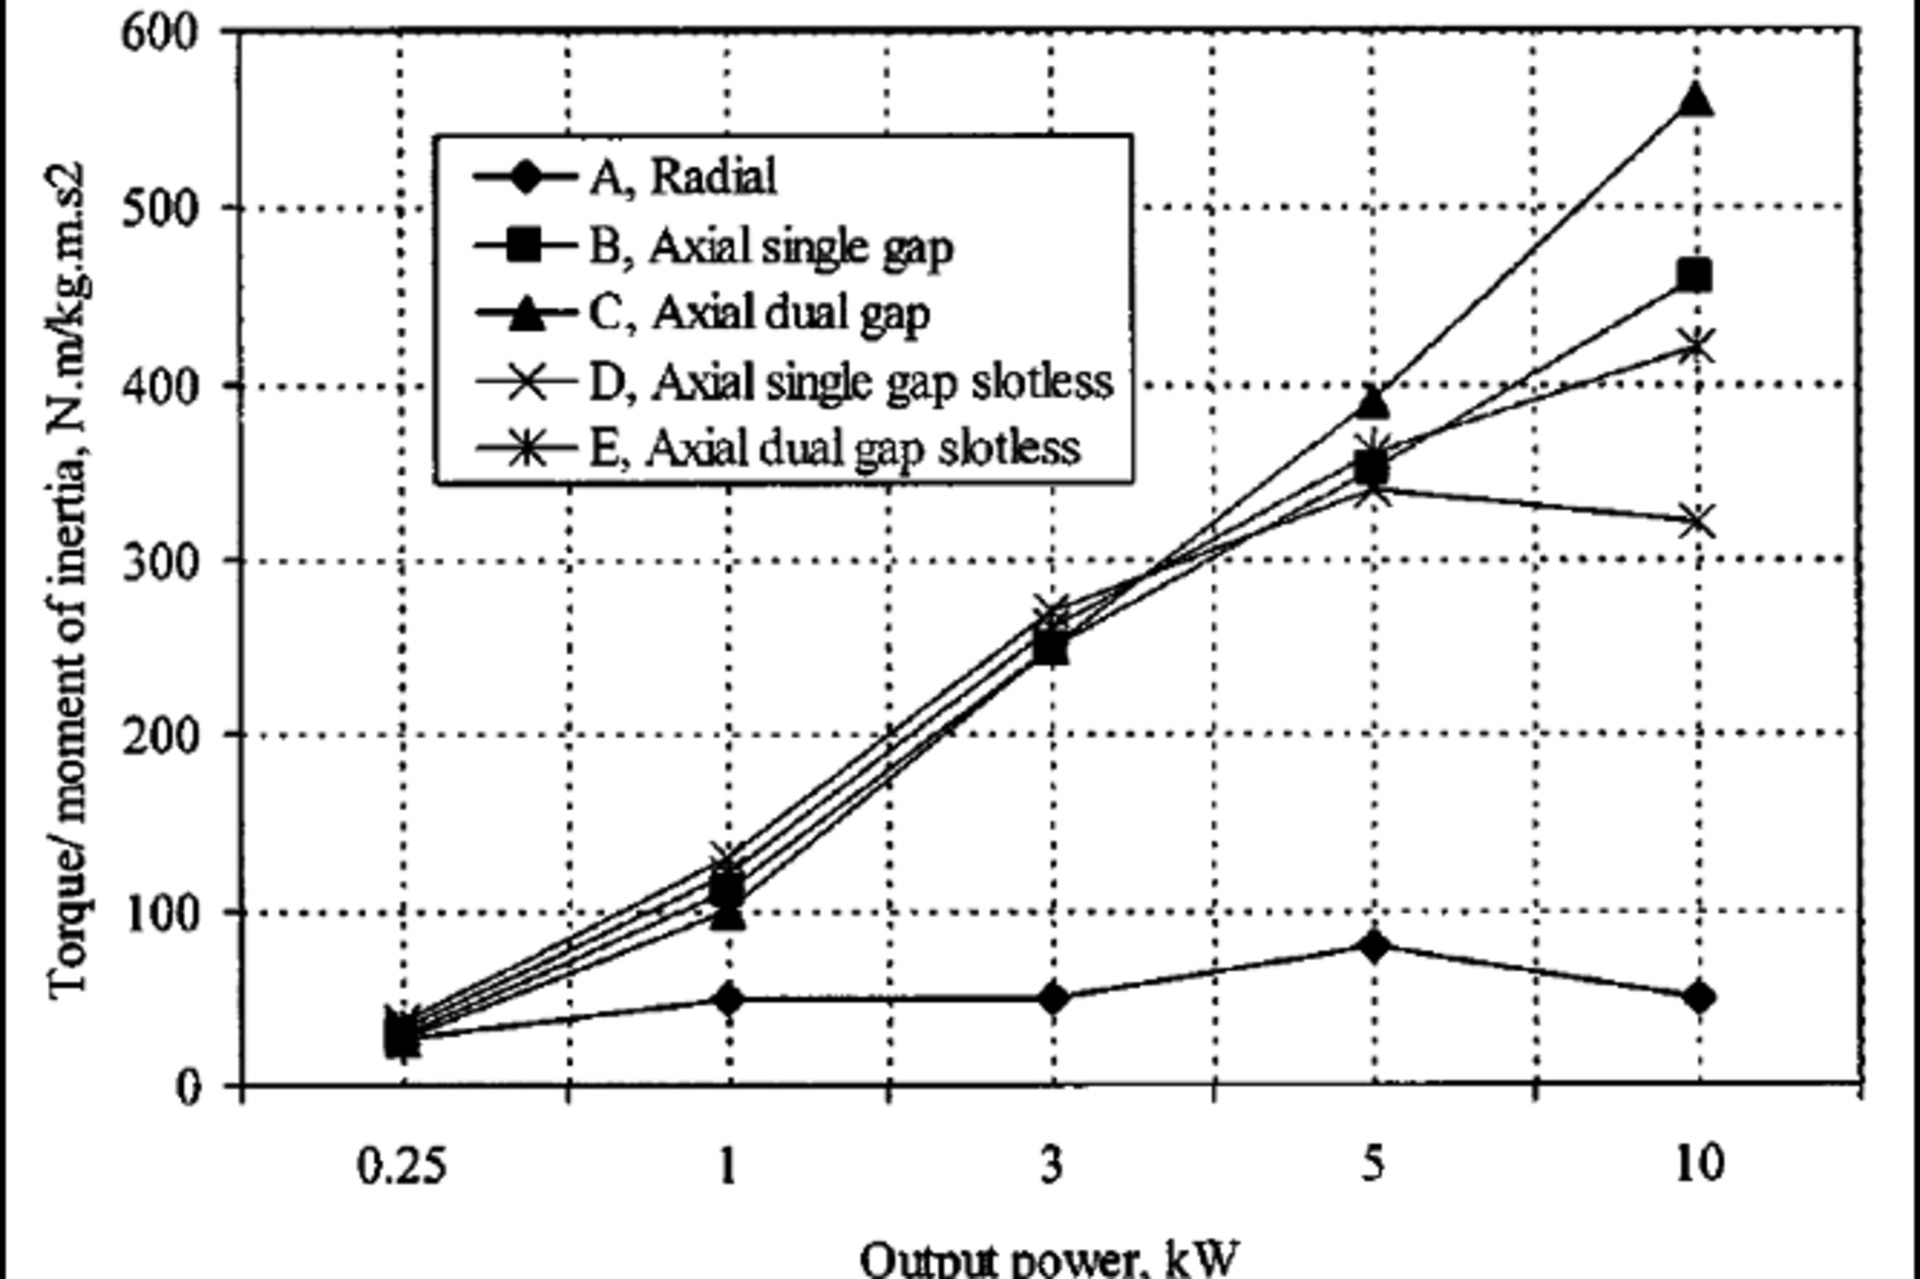 Torque divided by moment of inertia versus output power